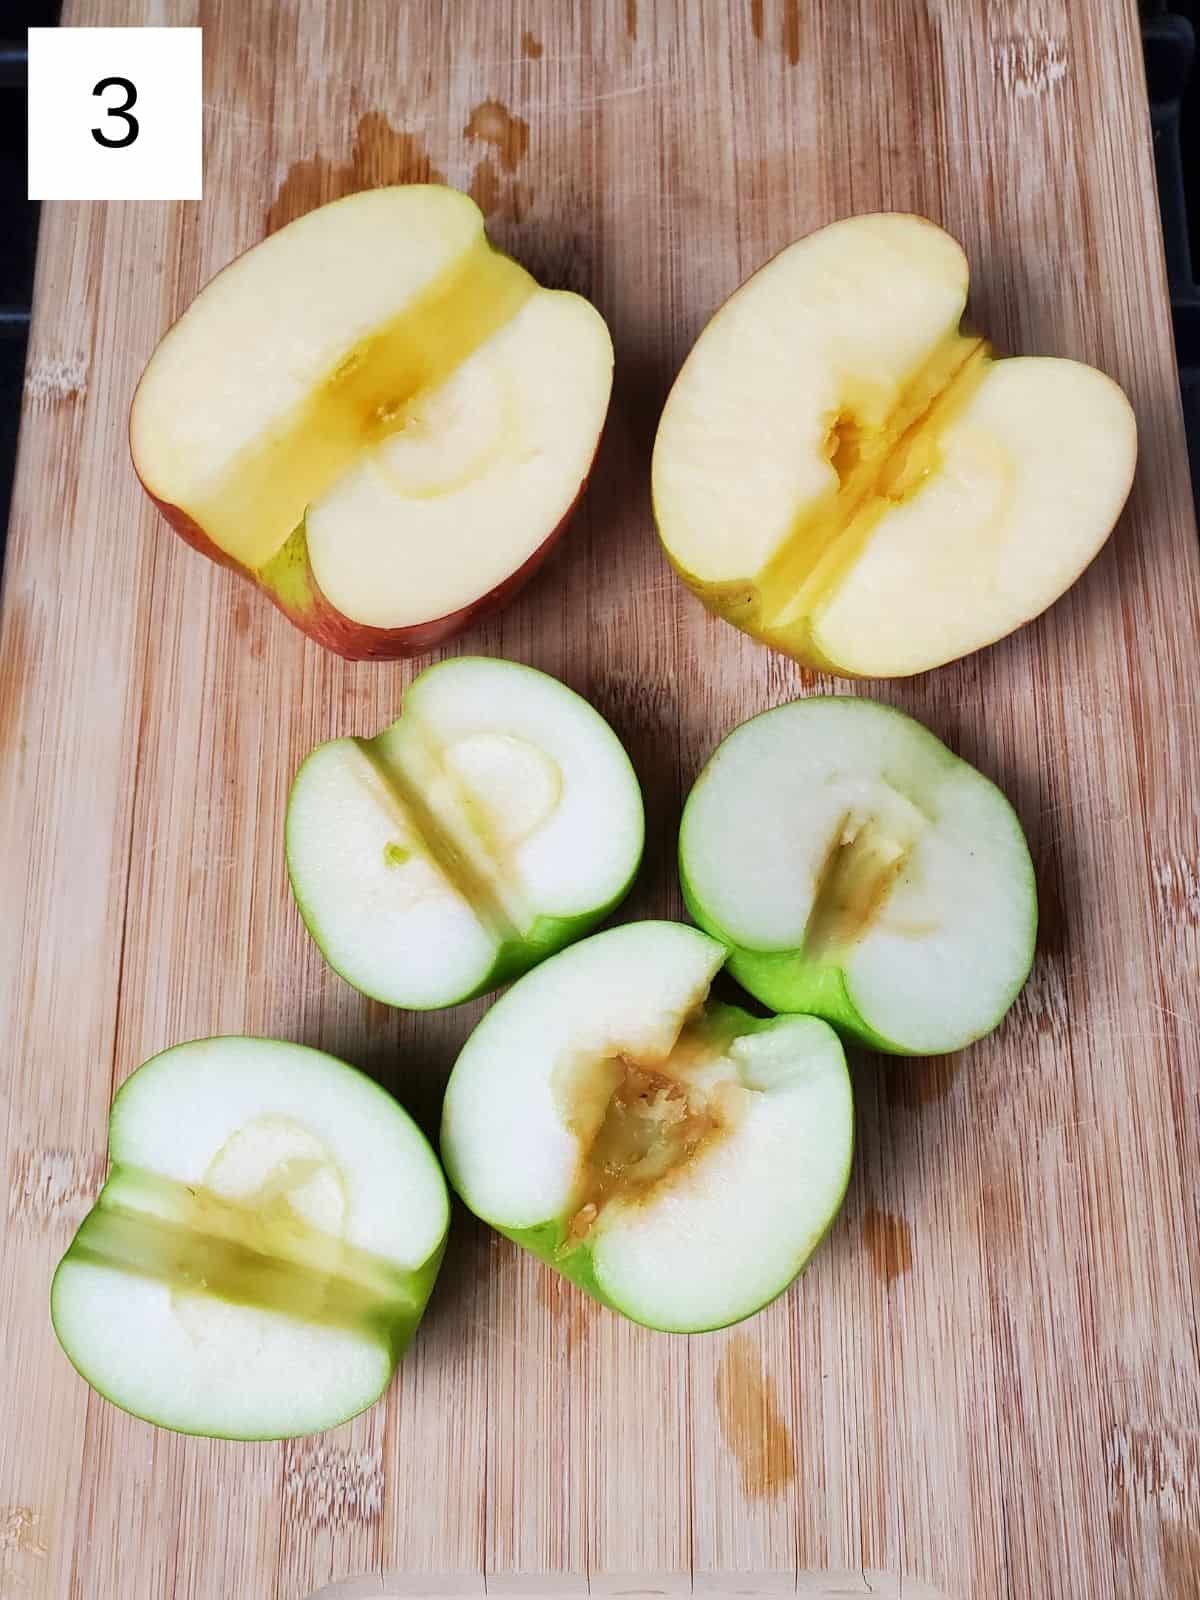 six halves of deseeded apples on a wooden cutting board.